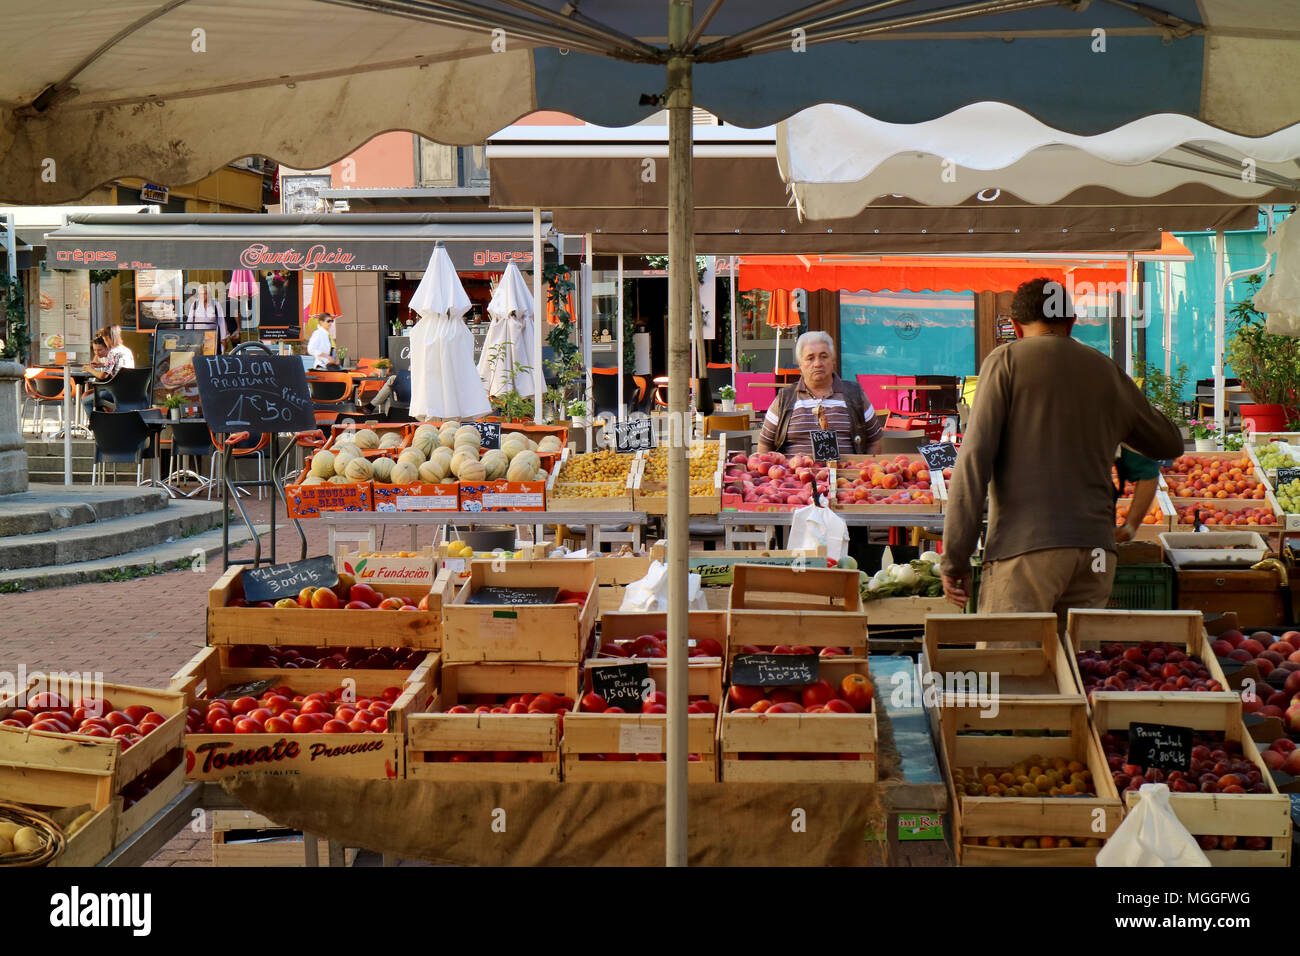 The fruit and veg market in the city of Le-Puy-en-Velay Stock Photo